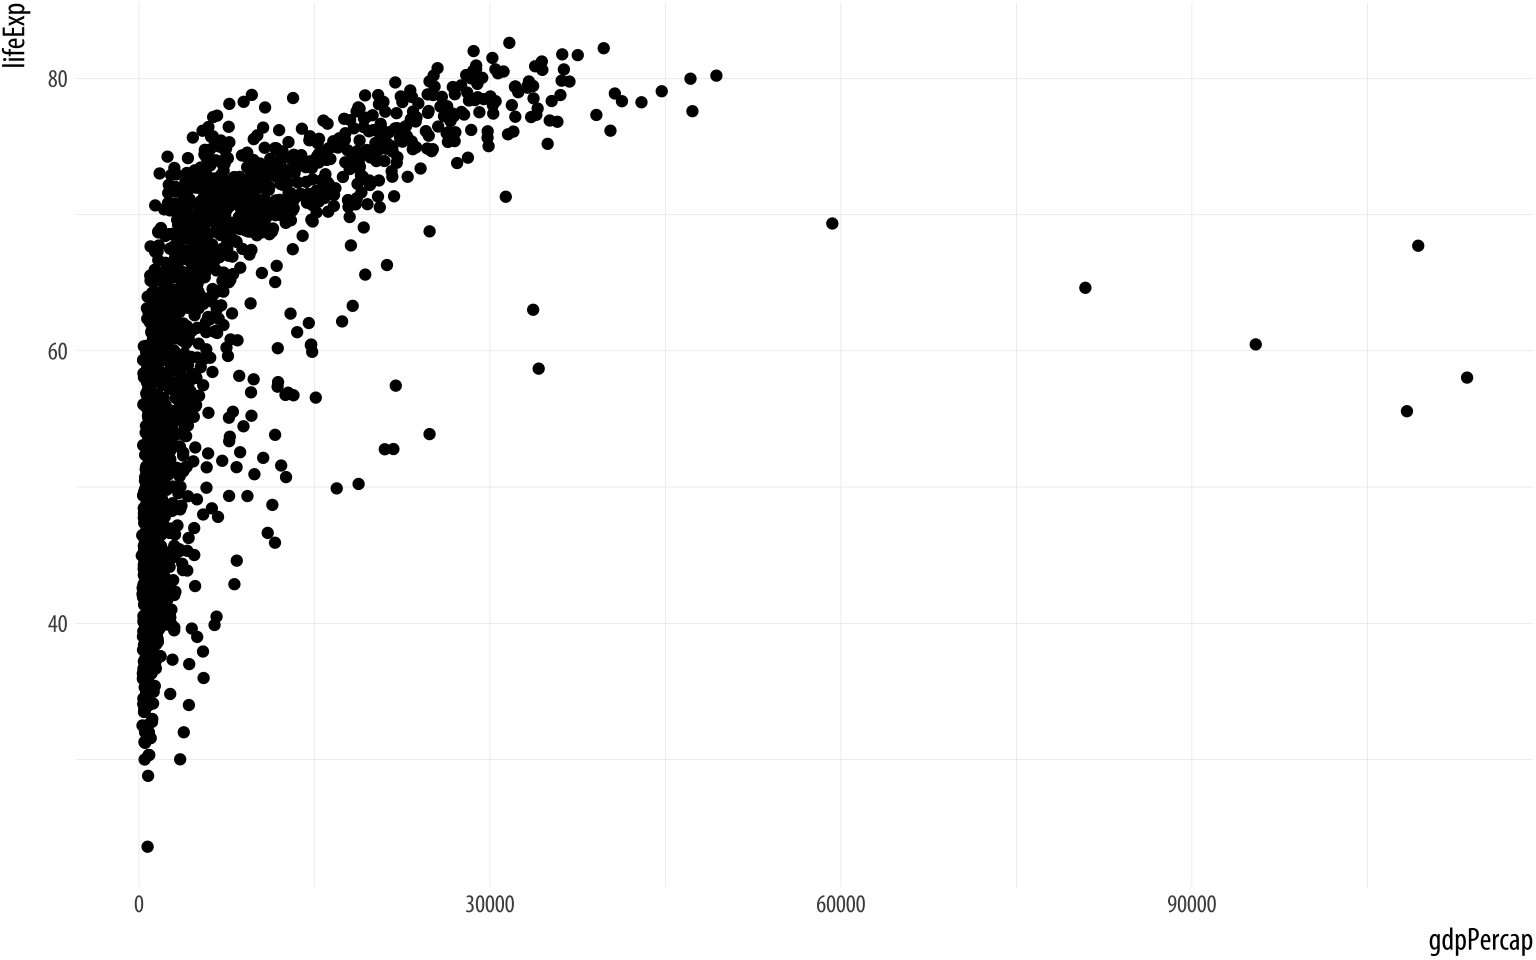 A scatterplot of Life Expectancy vs GDP